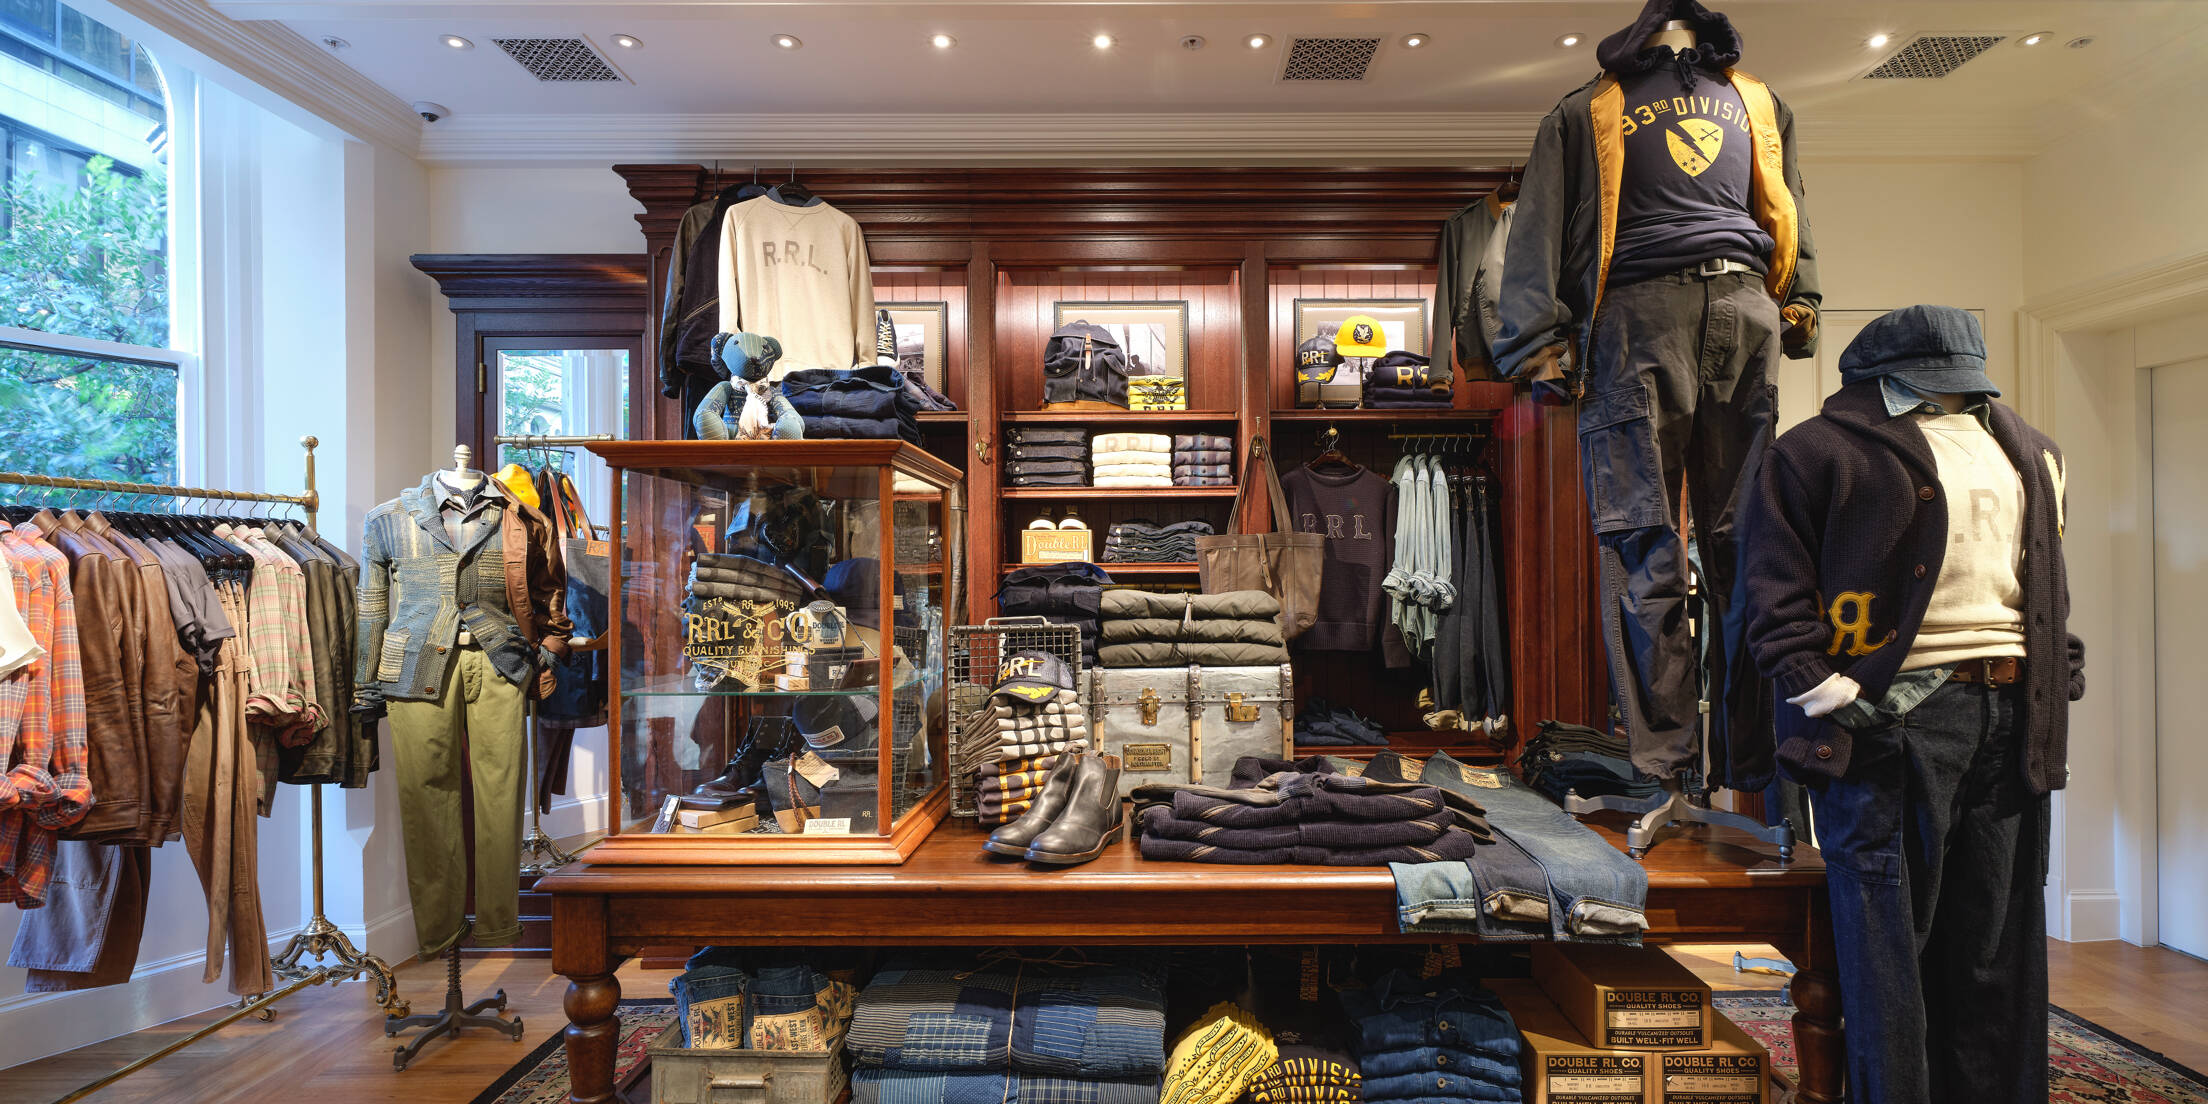 Welcome to Ralph Lauren's home: Sydney flagship to offer classics